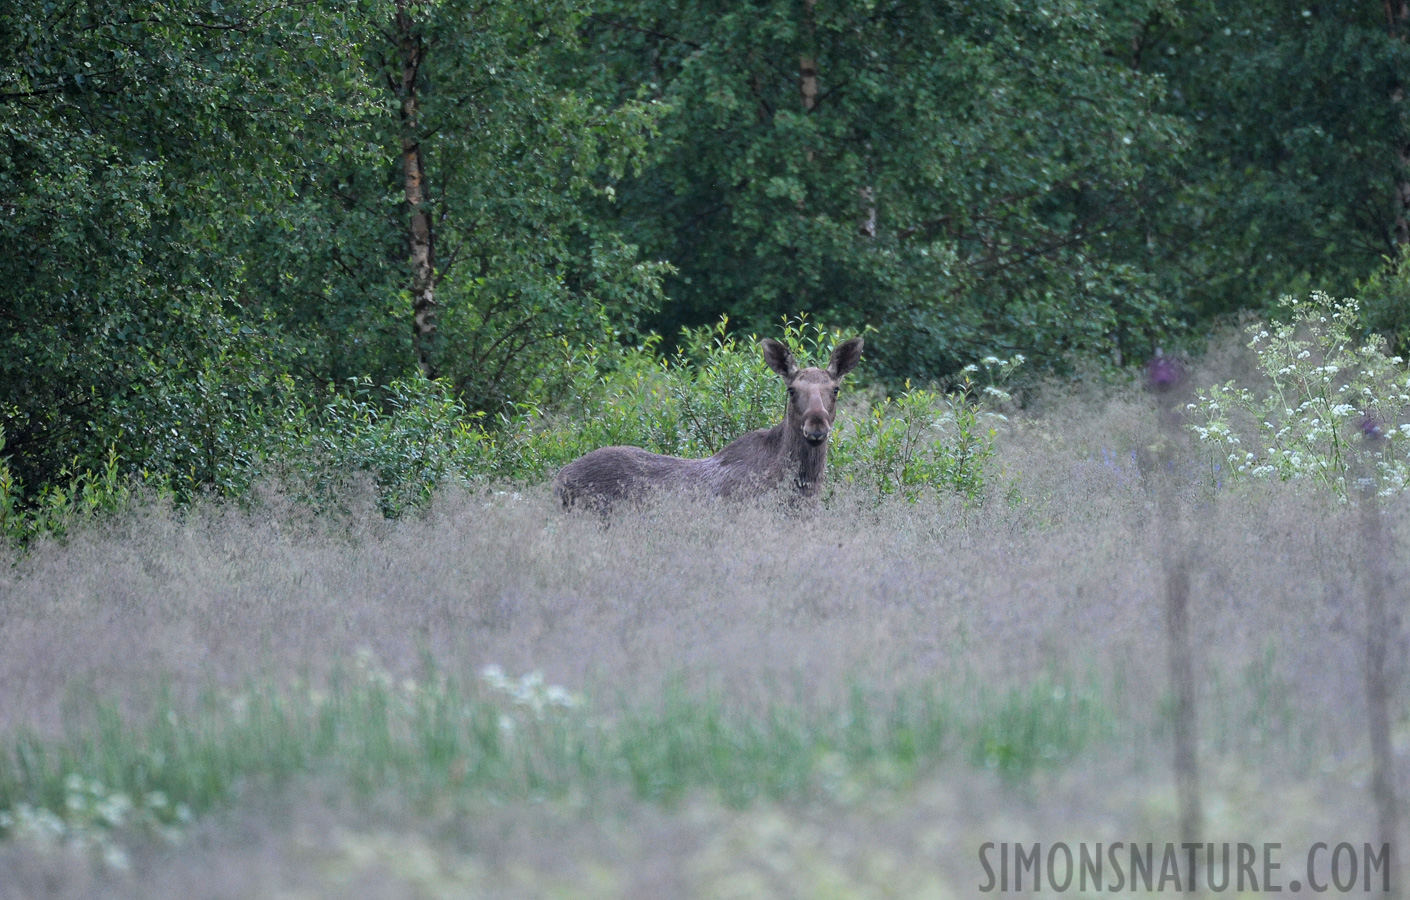 Alces alces alces [550 mm, 1/40 sec at f / 5.6, ISO 2500]